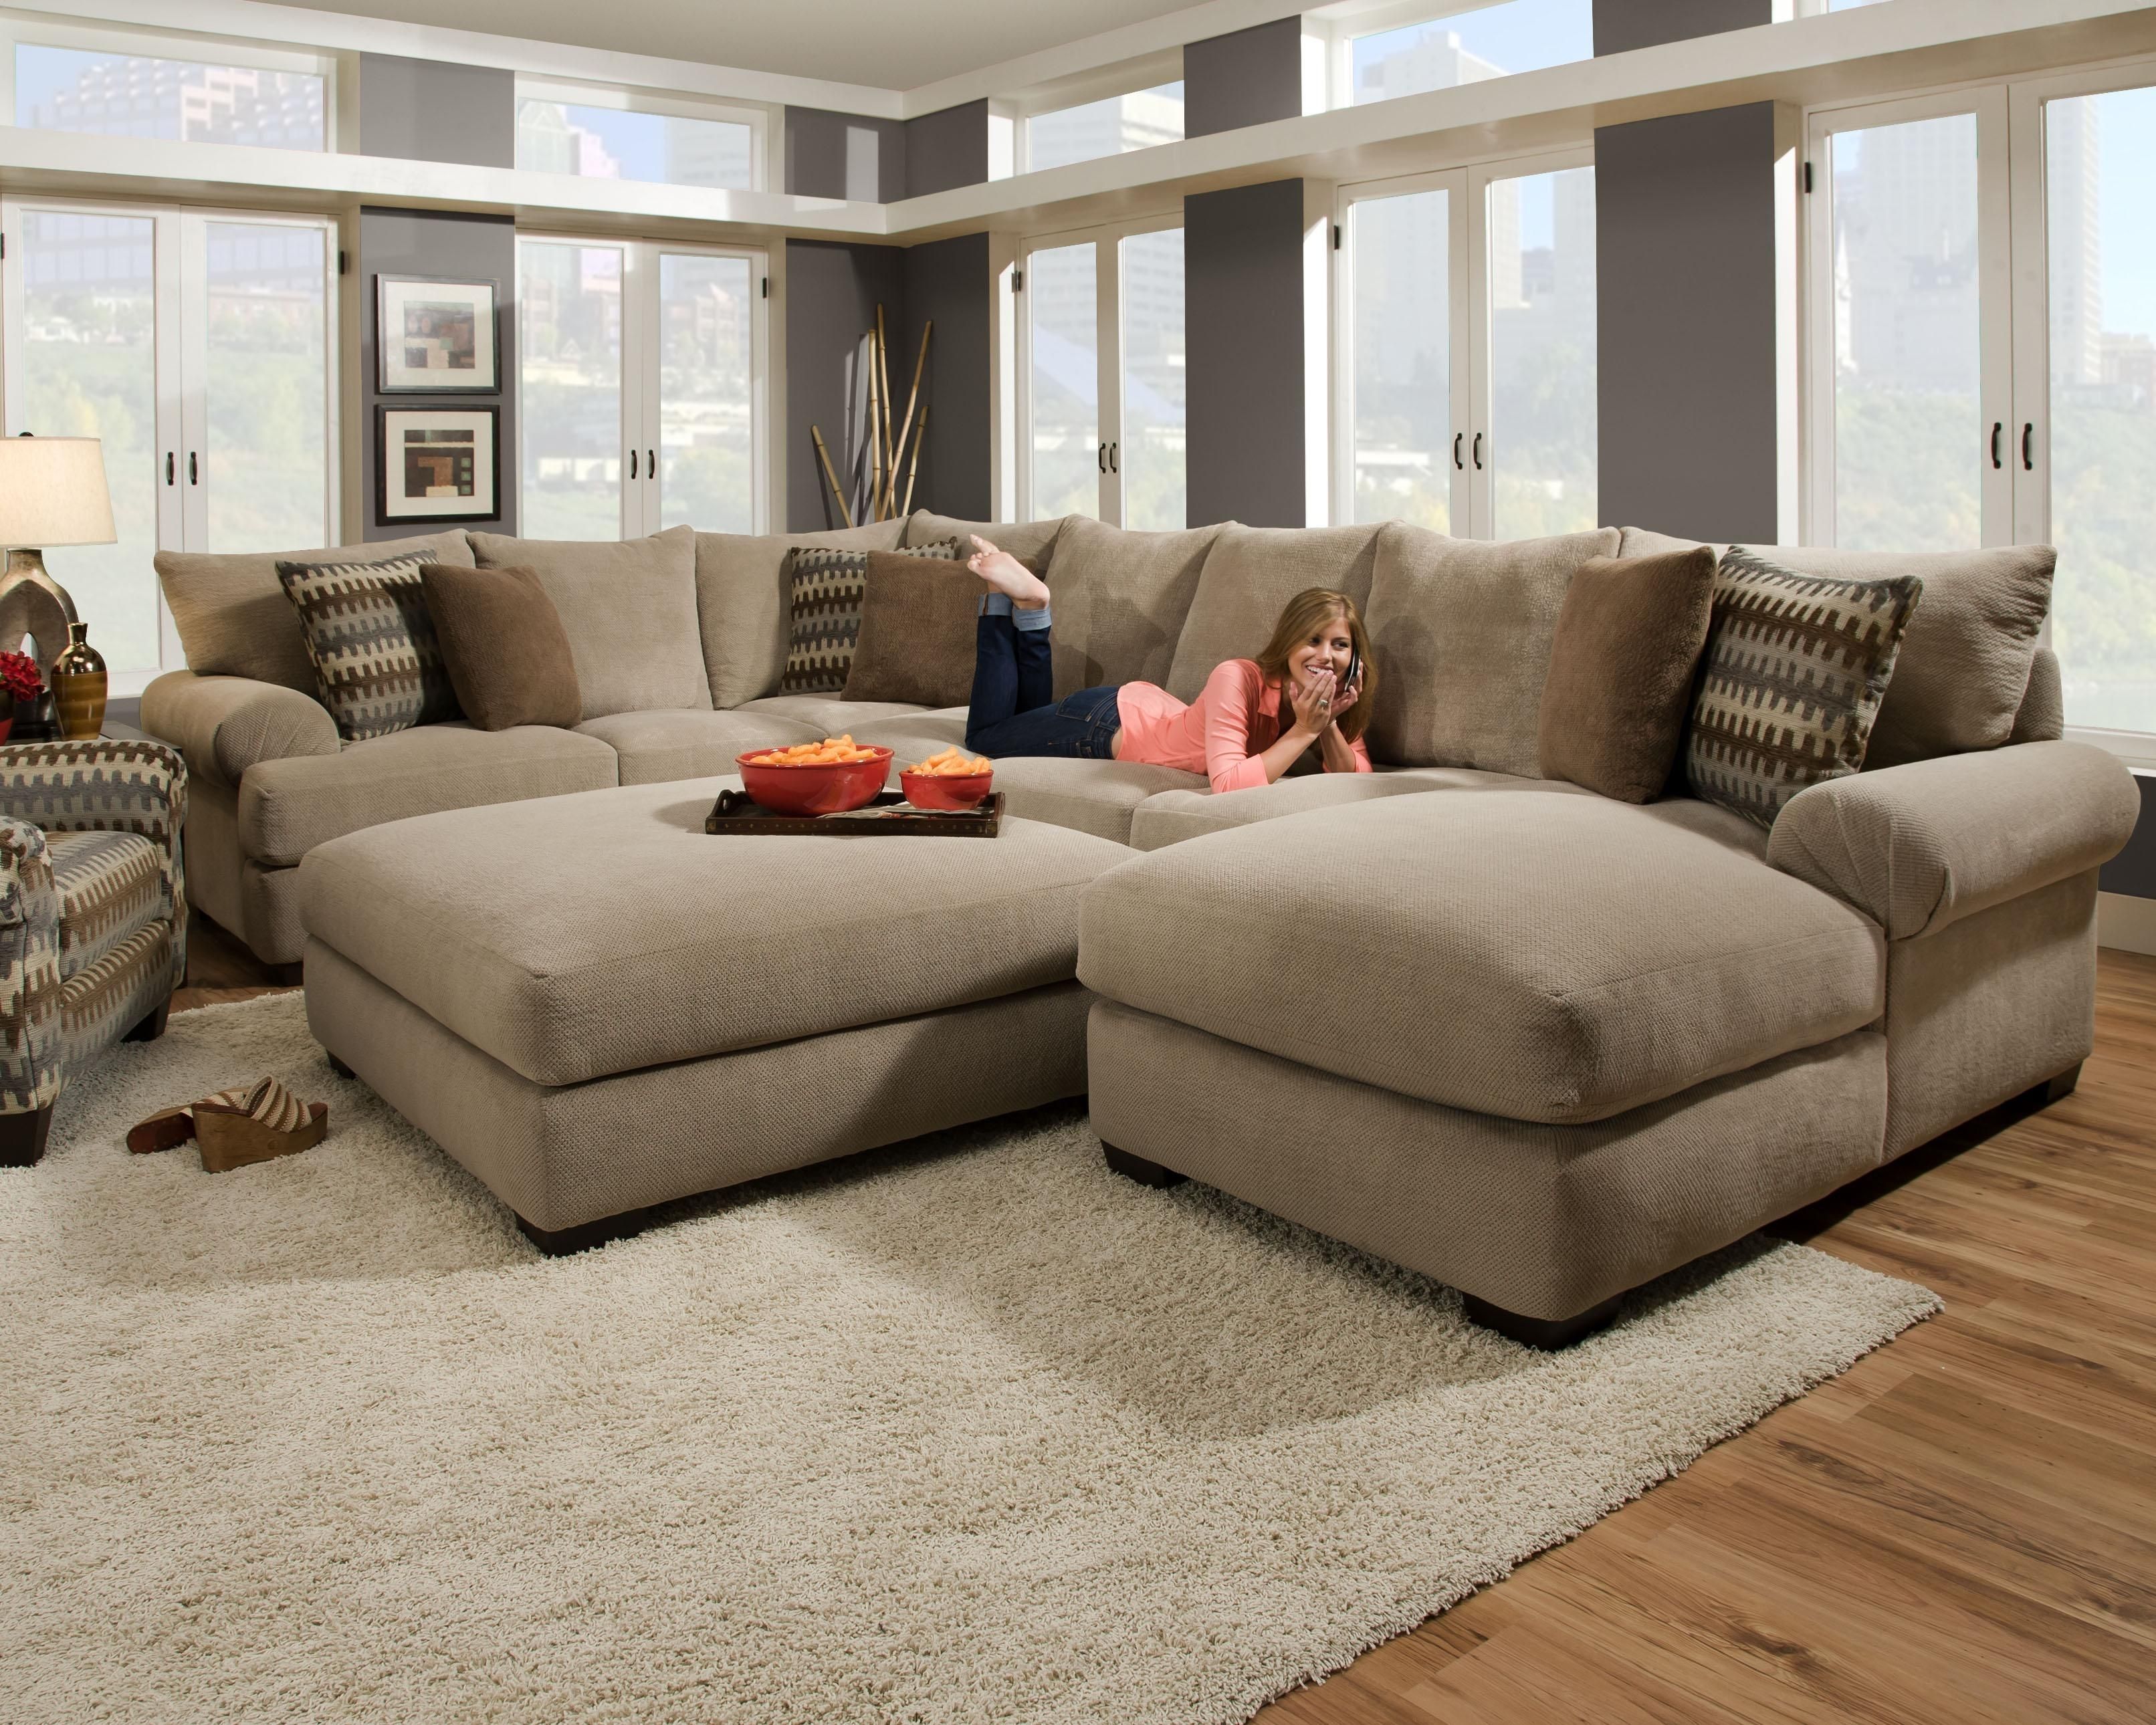 Furniture Design Idea For Living Room And Oversized U Shaped Within Big U Shaped Couches (View 4 of 15)